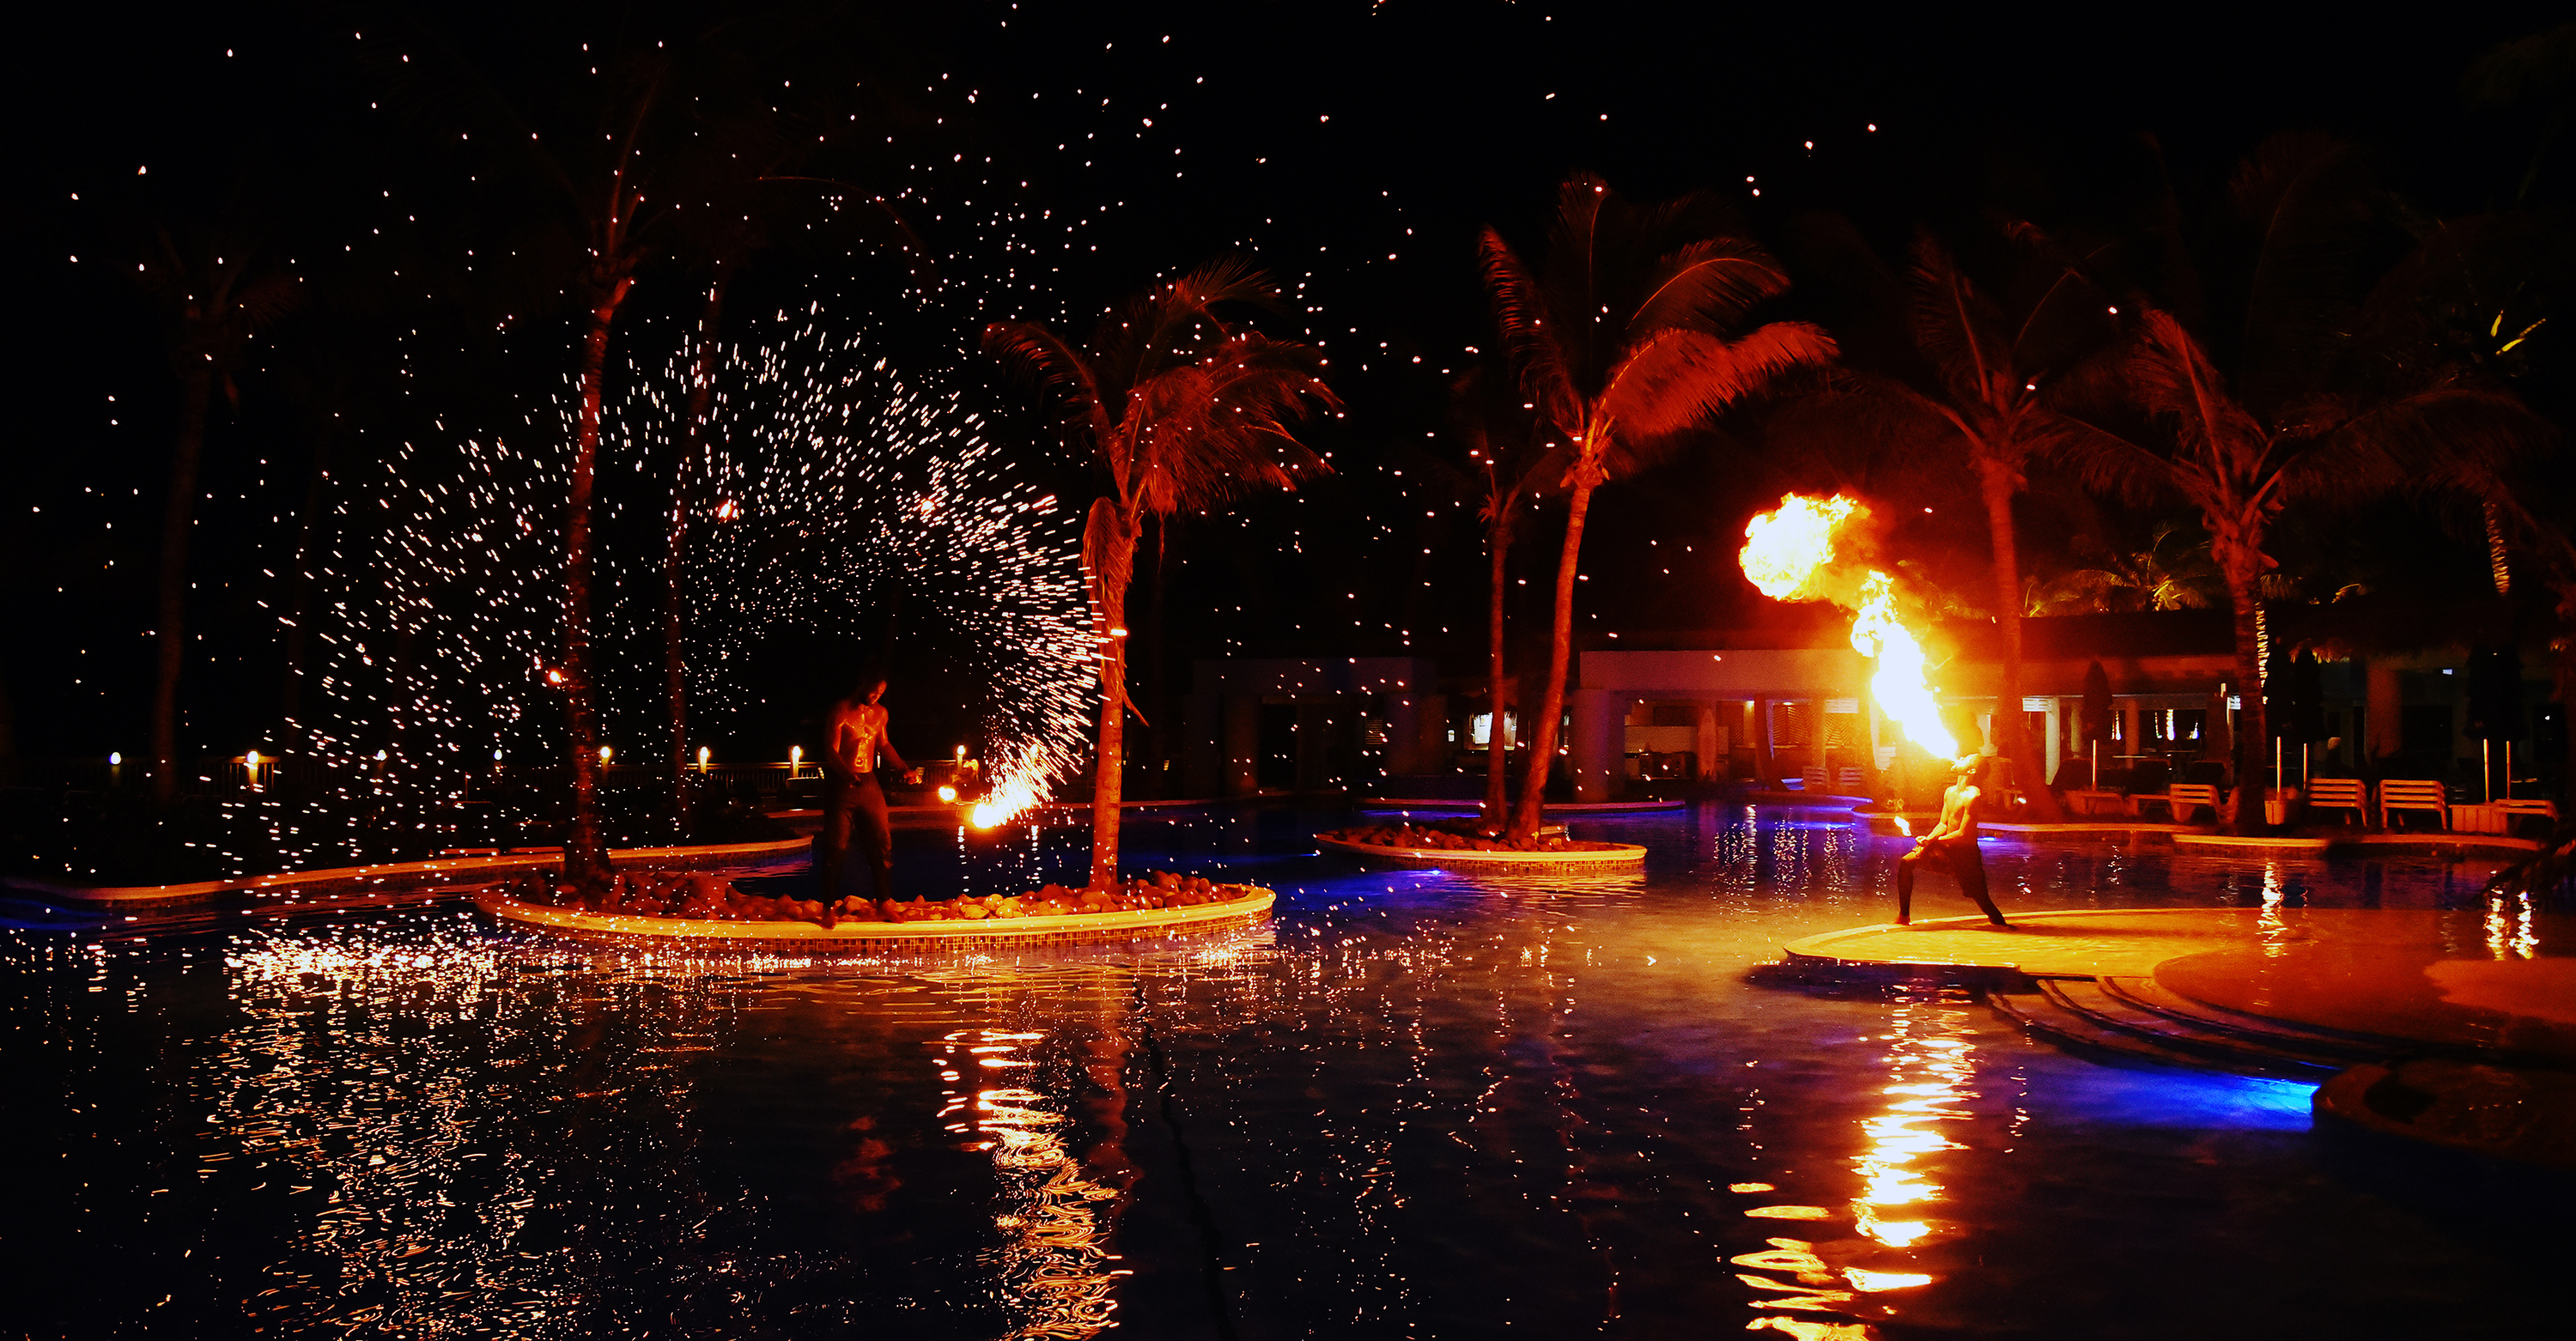 The fire-breather entertainers make it a night to remember (Coconut Bay/PA)